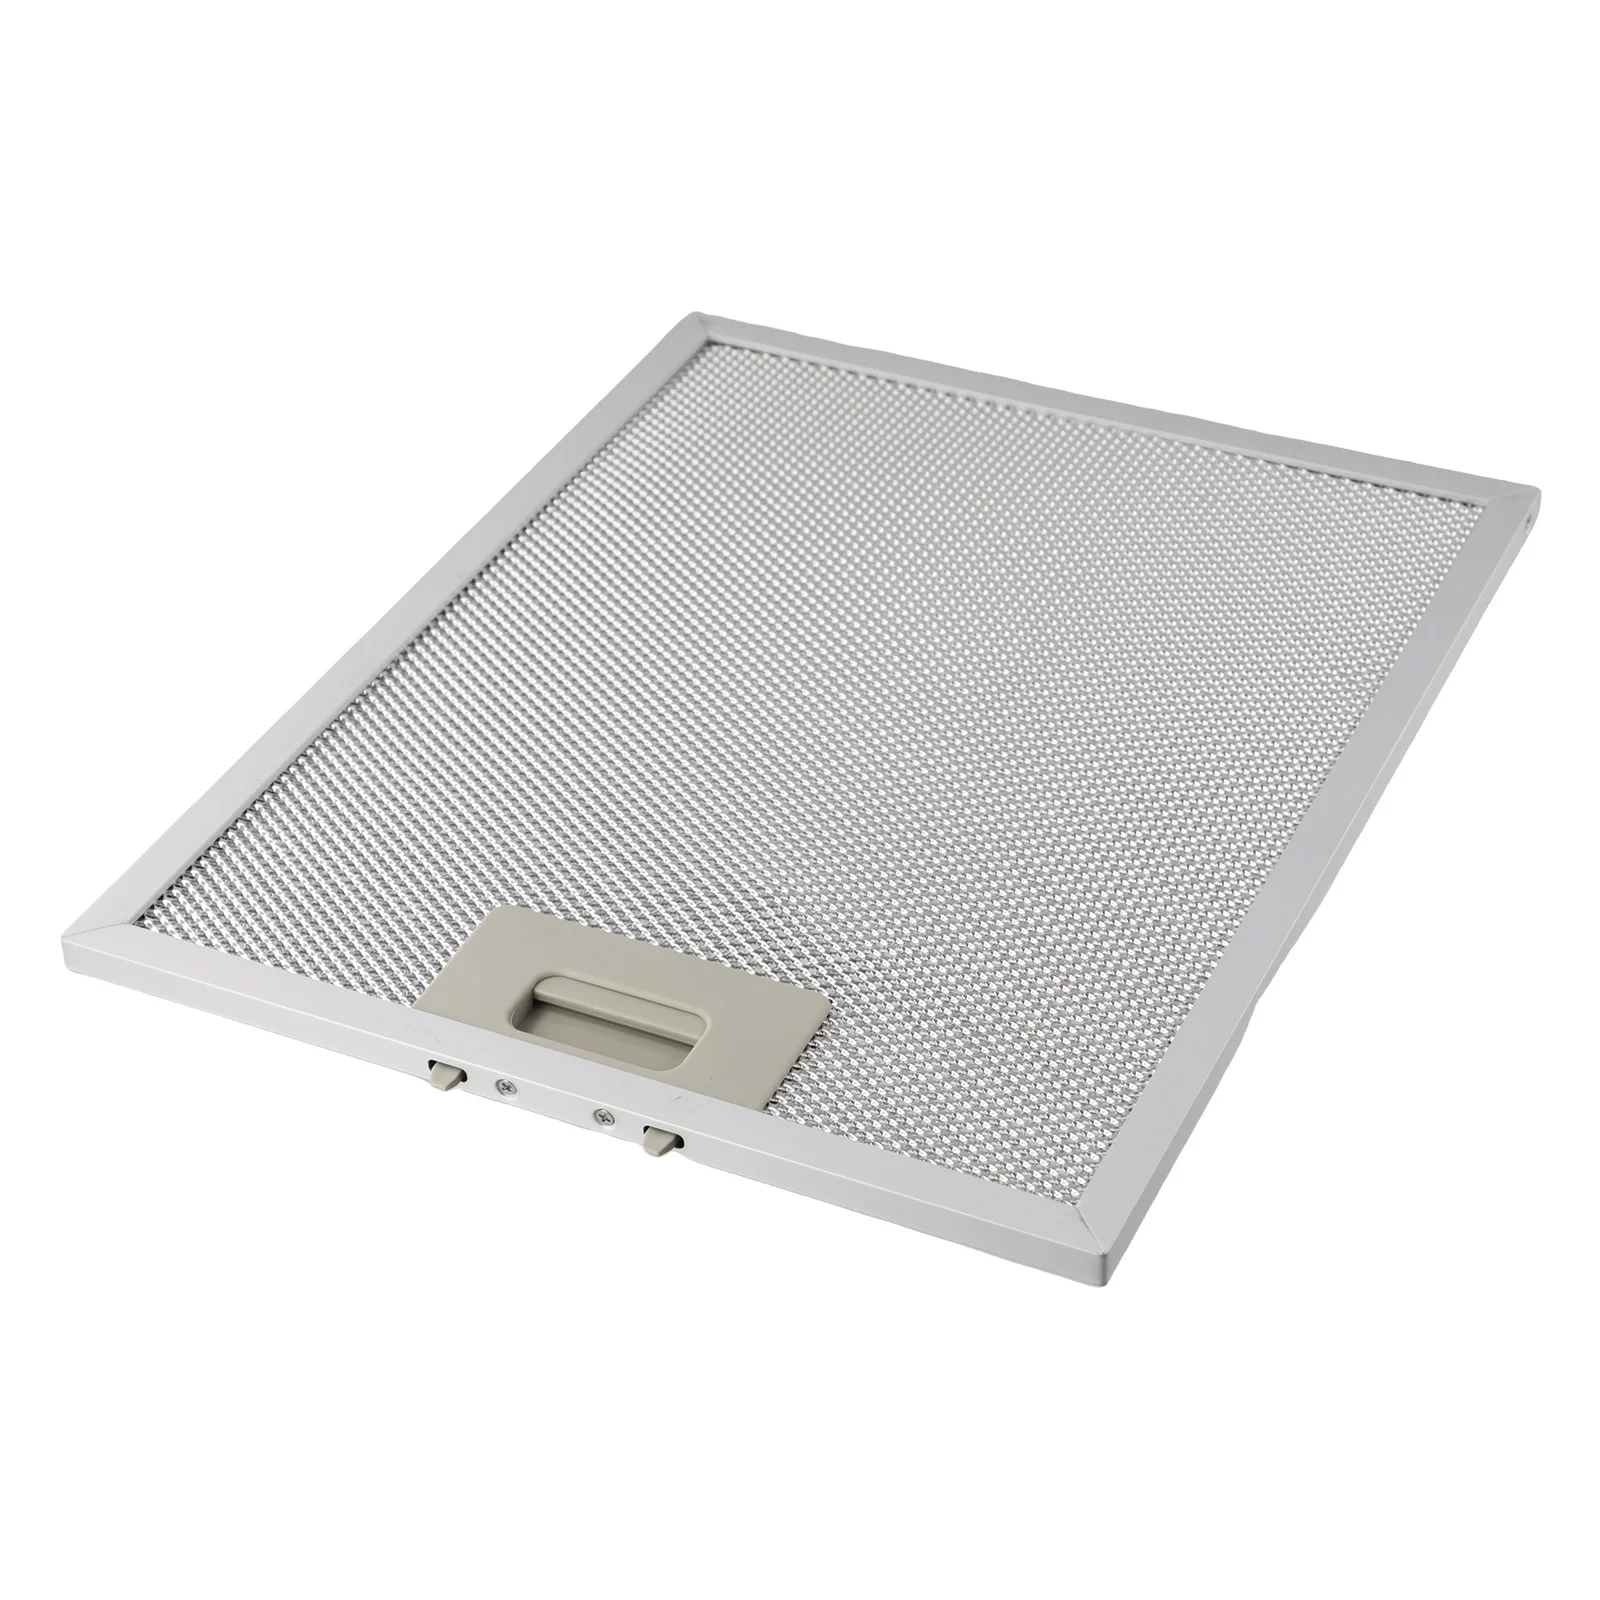 

Brand New Grease Filter Metal Filter 1PC 250 X 310mm 5 Layers Replacement Stainless Steel Suitable For Range Hood